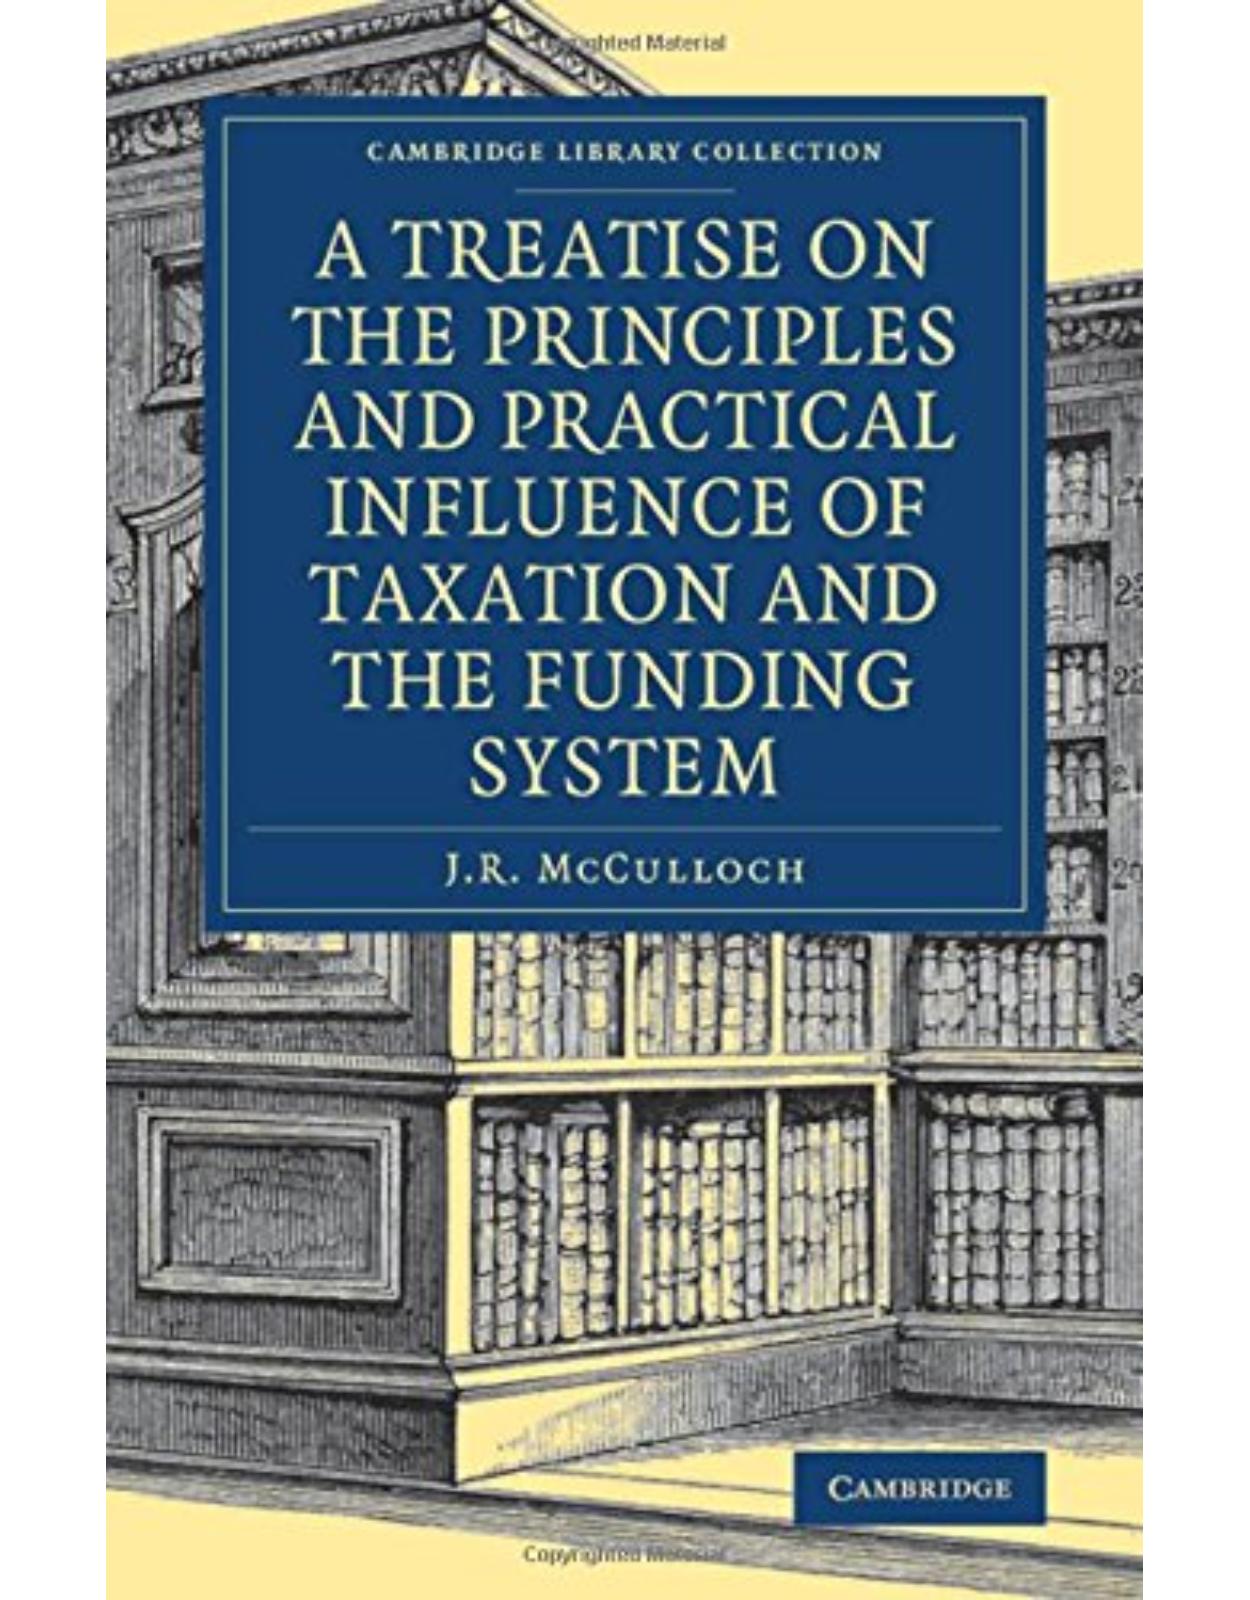 A Treatise on the Principles and Practical Influence of Taxation and the Funding System (Cambridge Library Collection - British and Irish History, 19th Century)